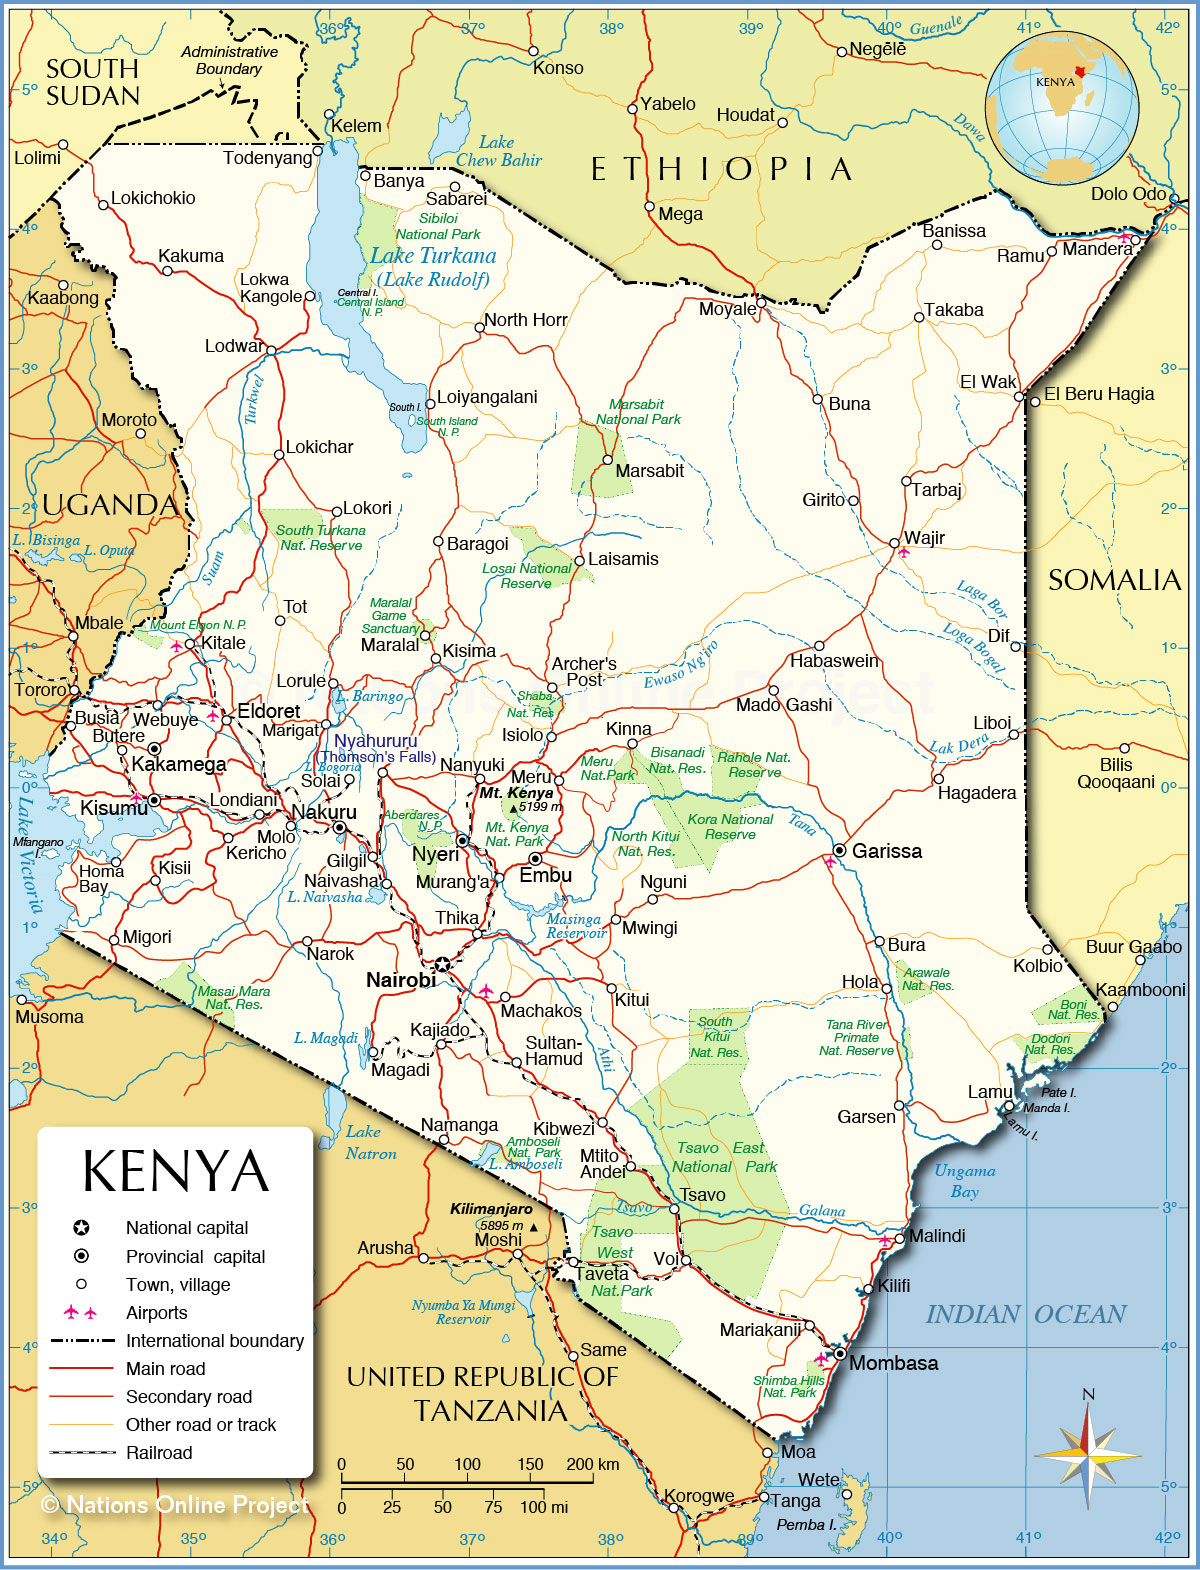 The Map Of Kenya Political Map of Kenya   Nations Online Project